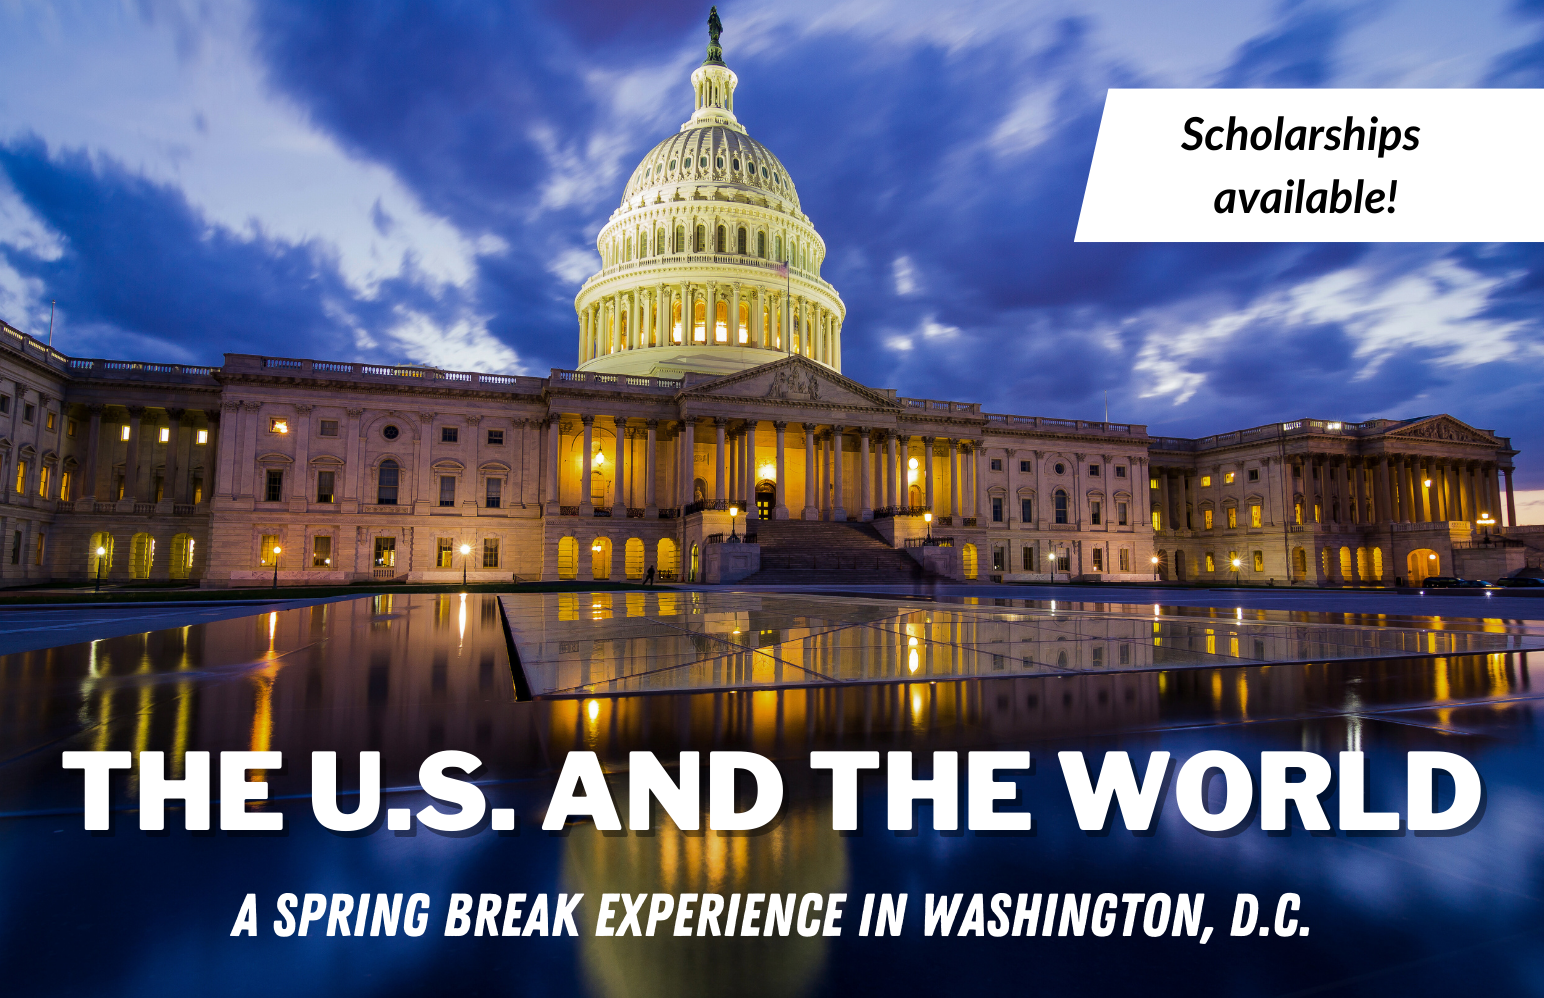 The U.S. and the World: A Spring Break Experience in Washington, D.C. (Scholarships Available!)